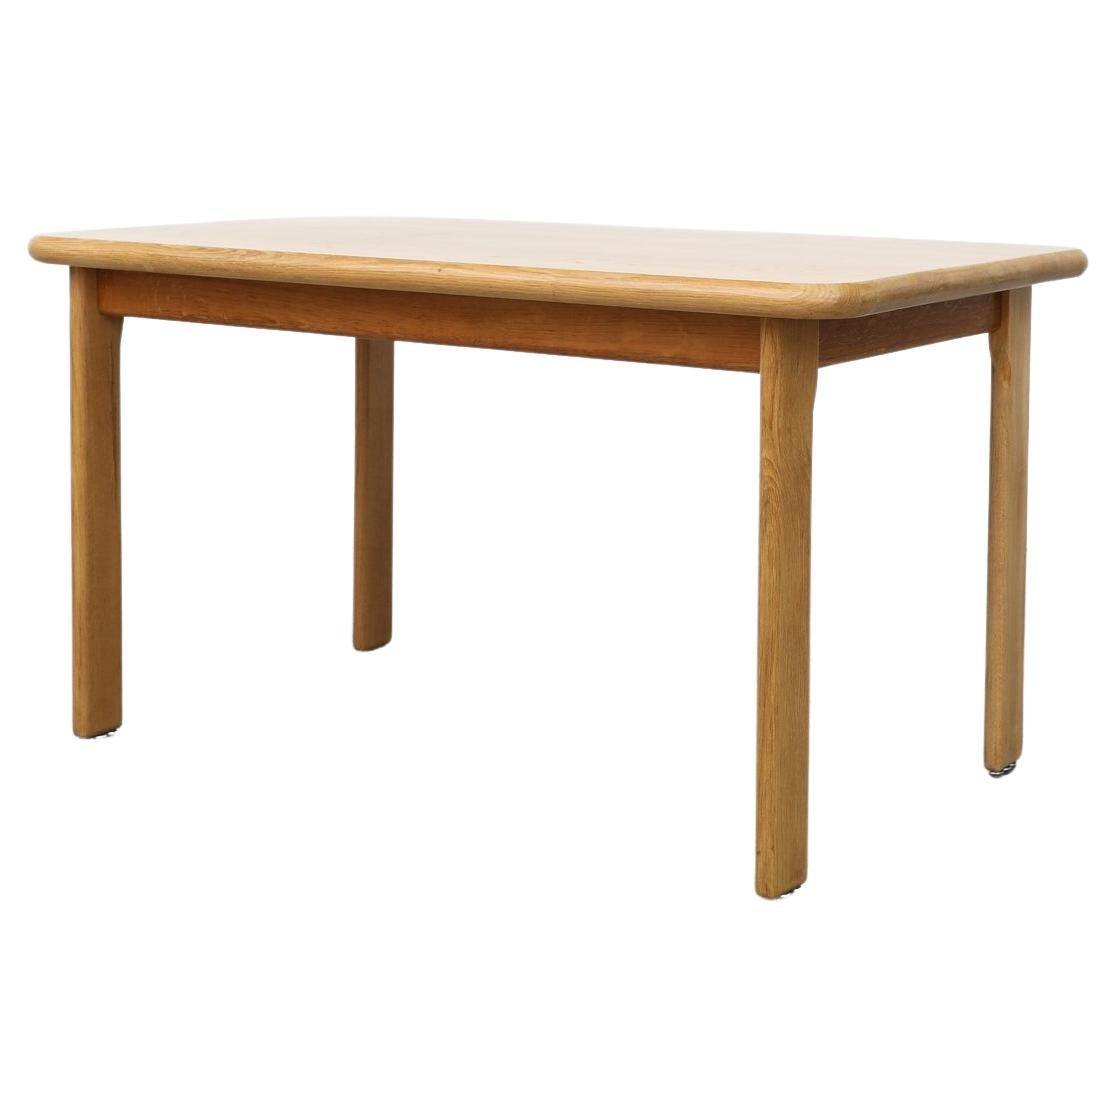 Rainer Daumiller Inspired Solid Oak Dining Table with Rounded Edges